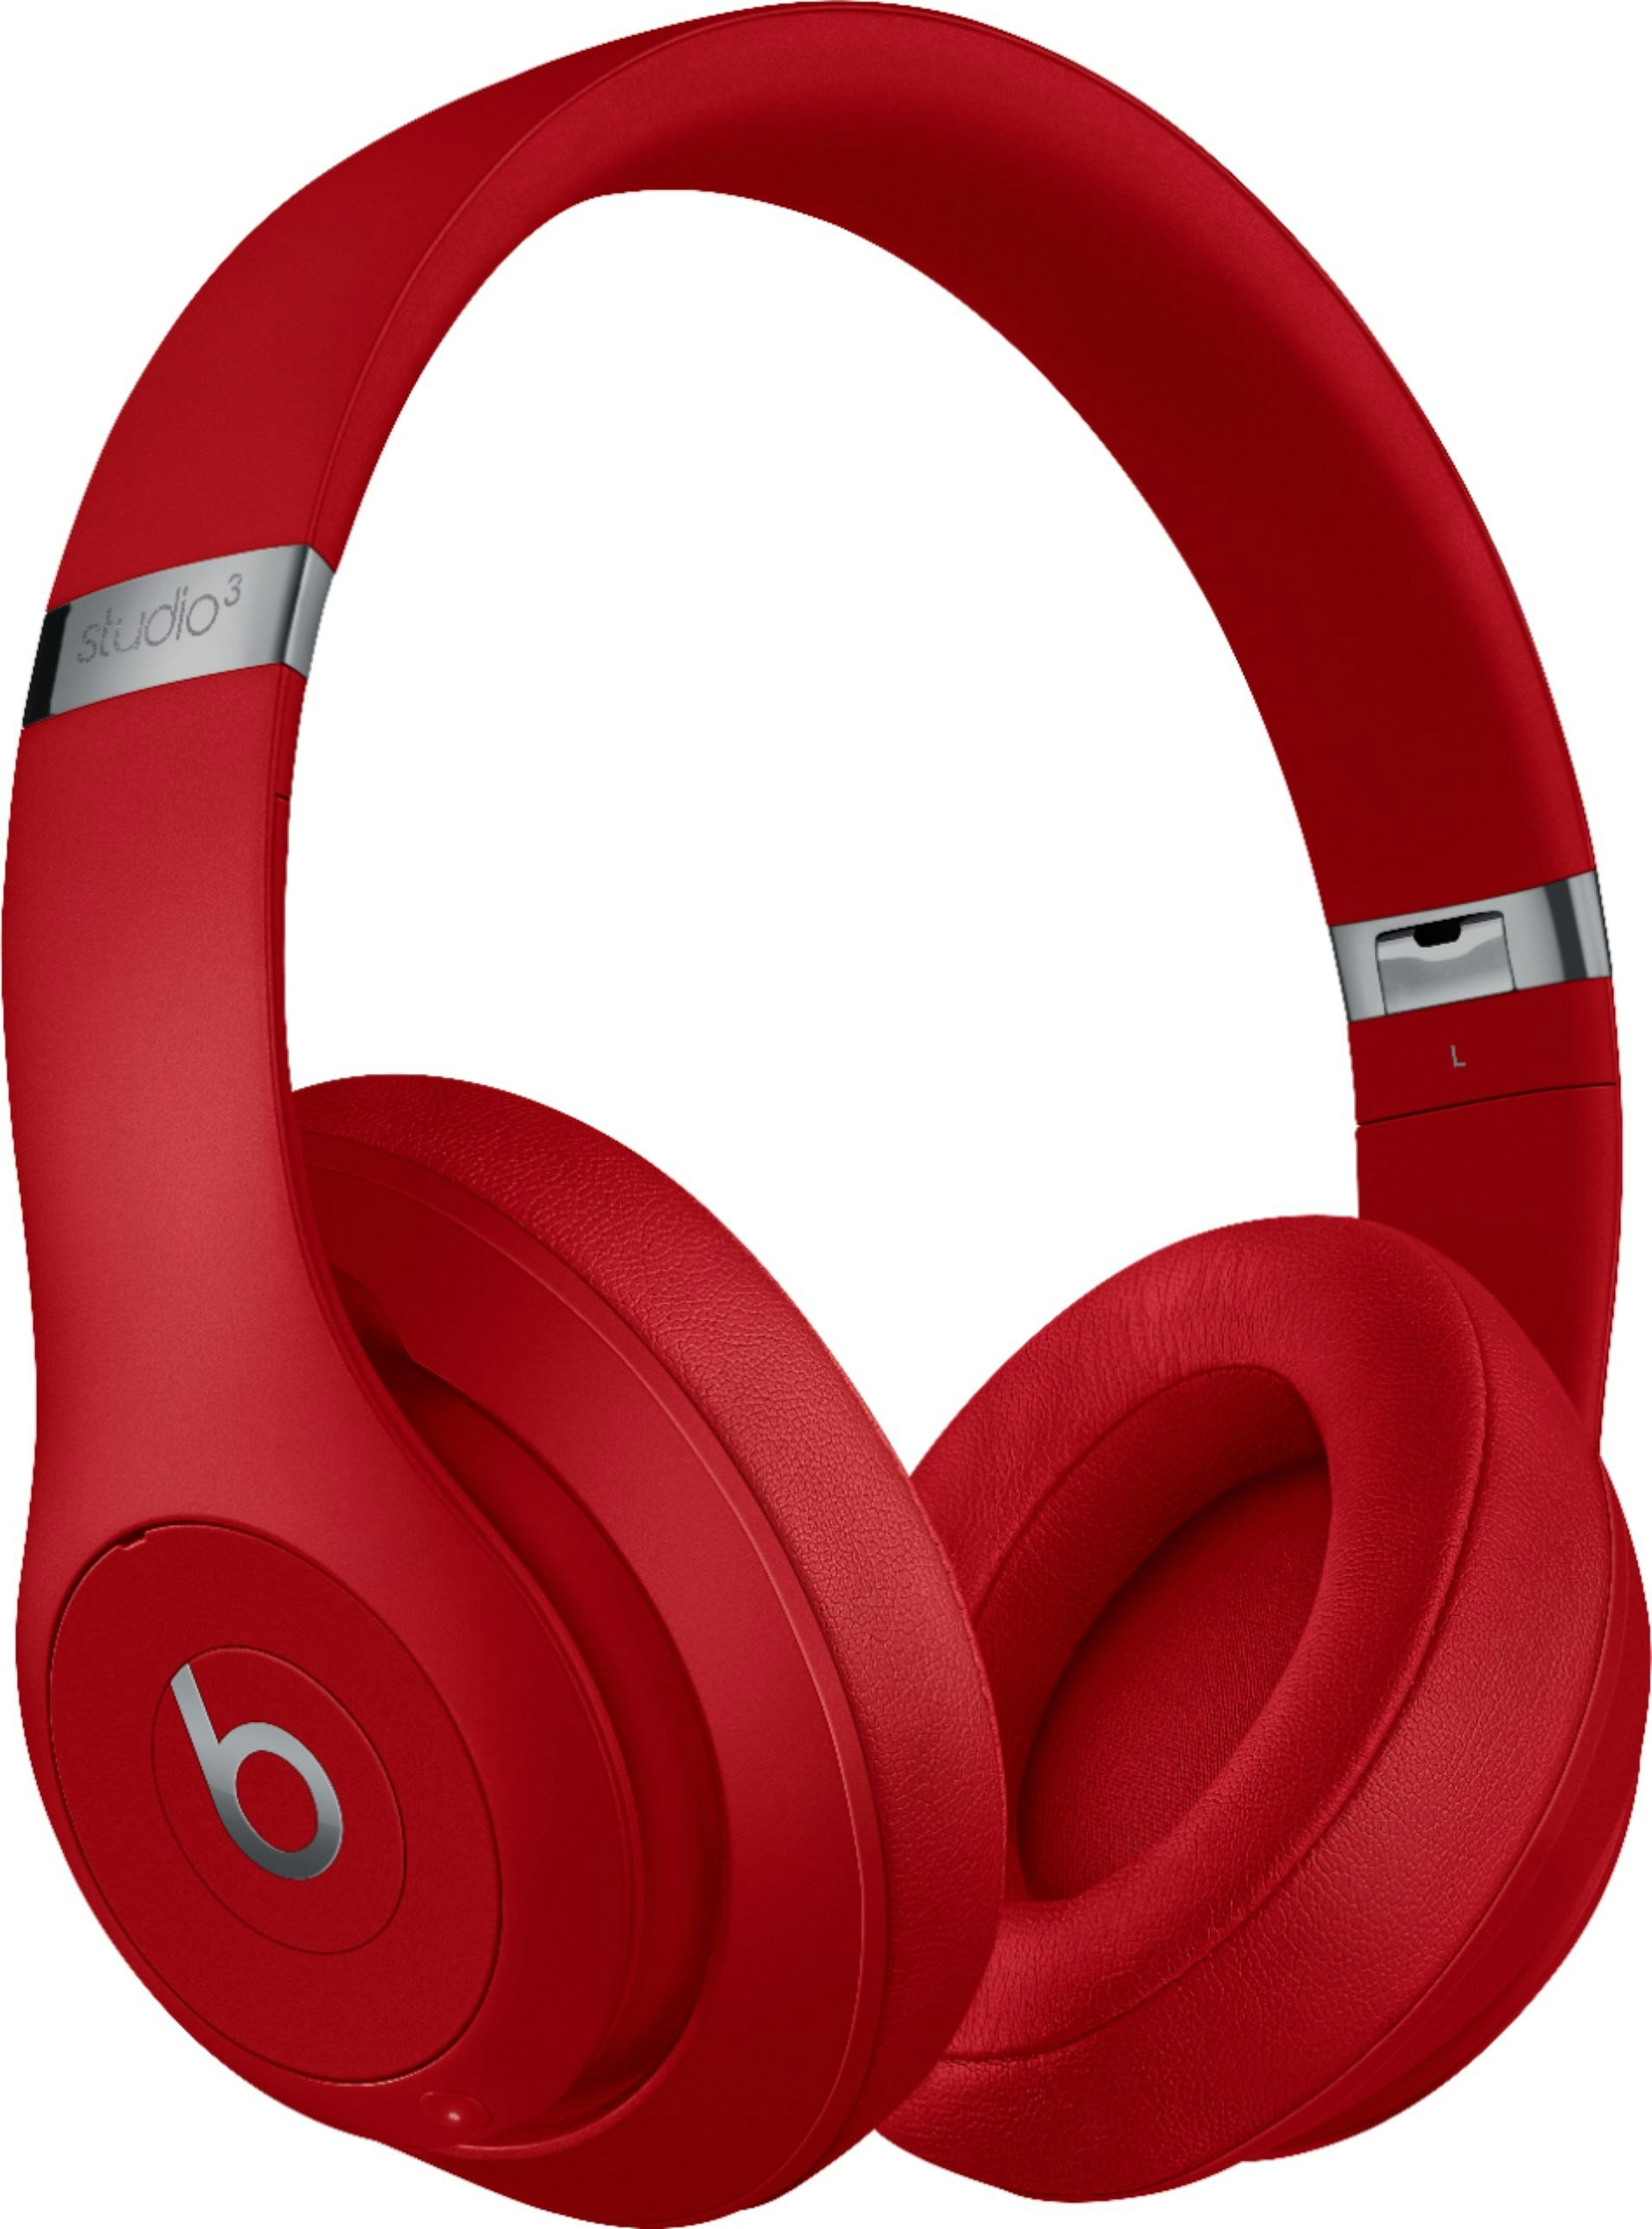 Beats by Dr. Dre Solo3 Wireless Headphones MQD02LL/A Red -